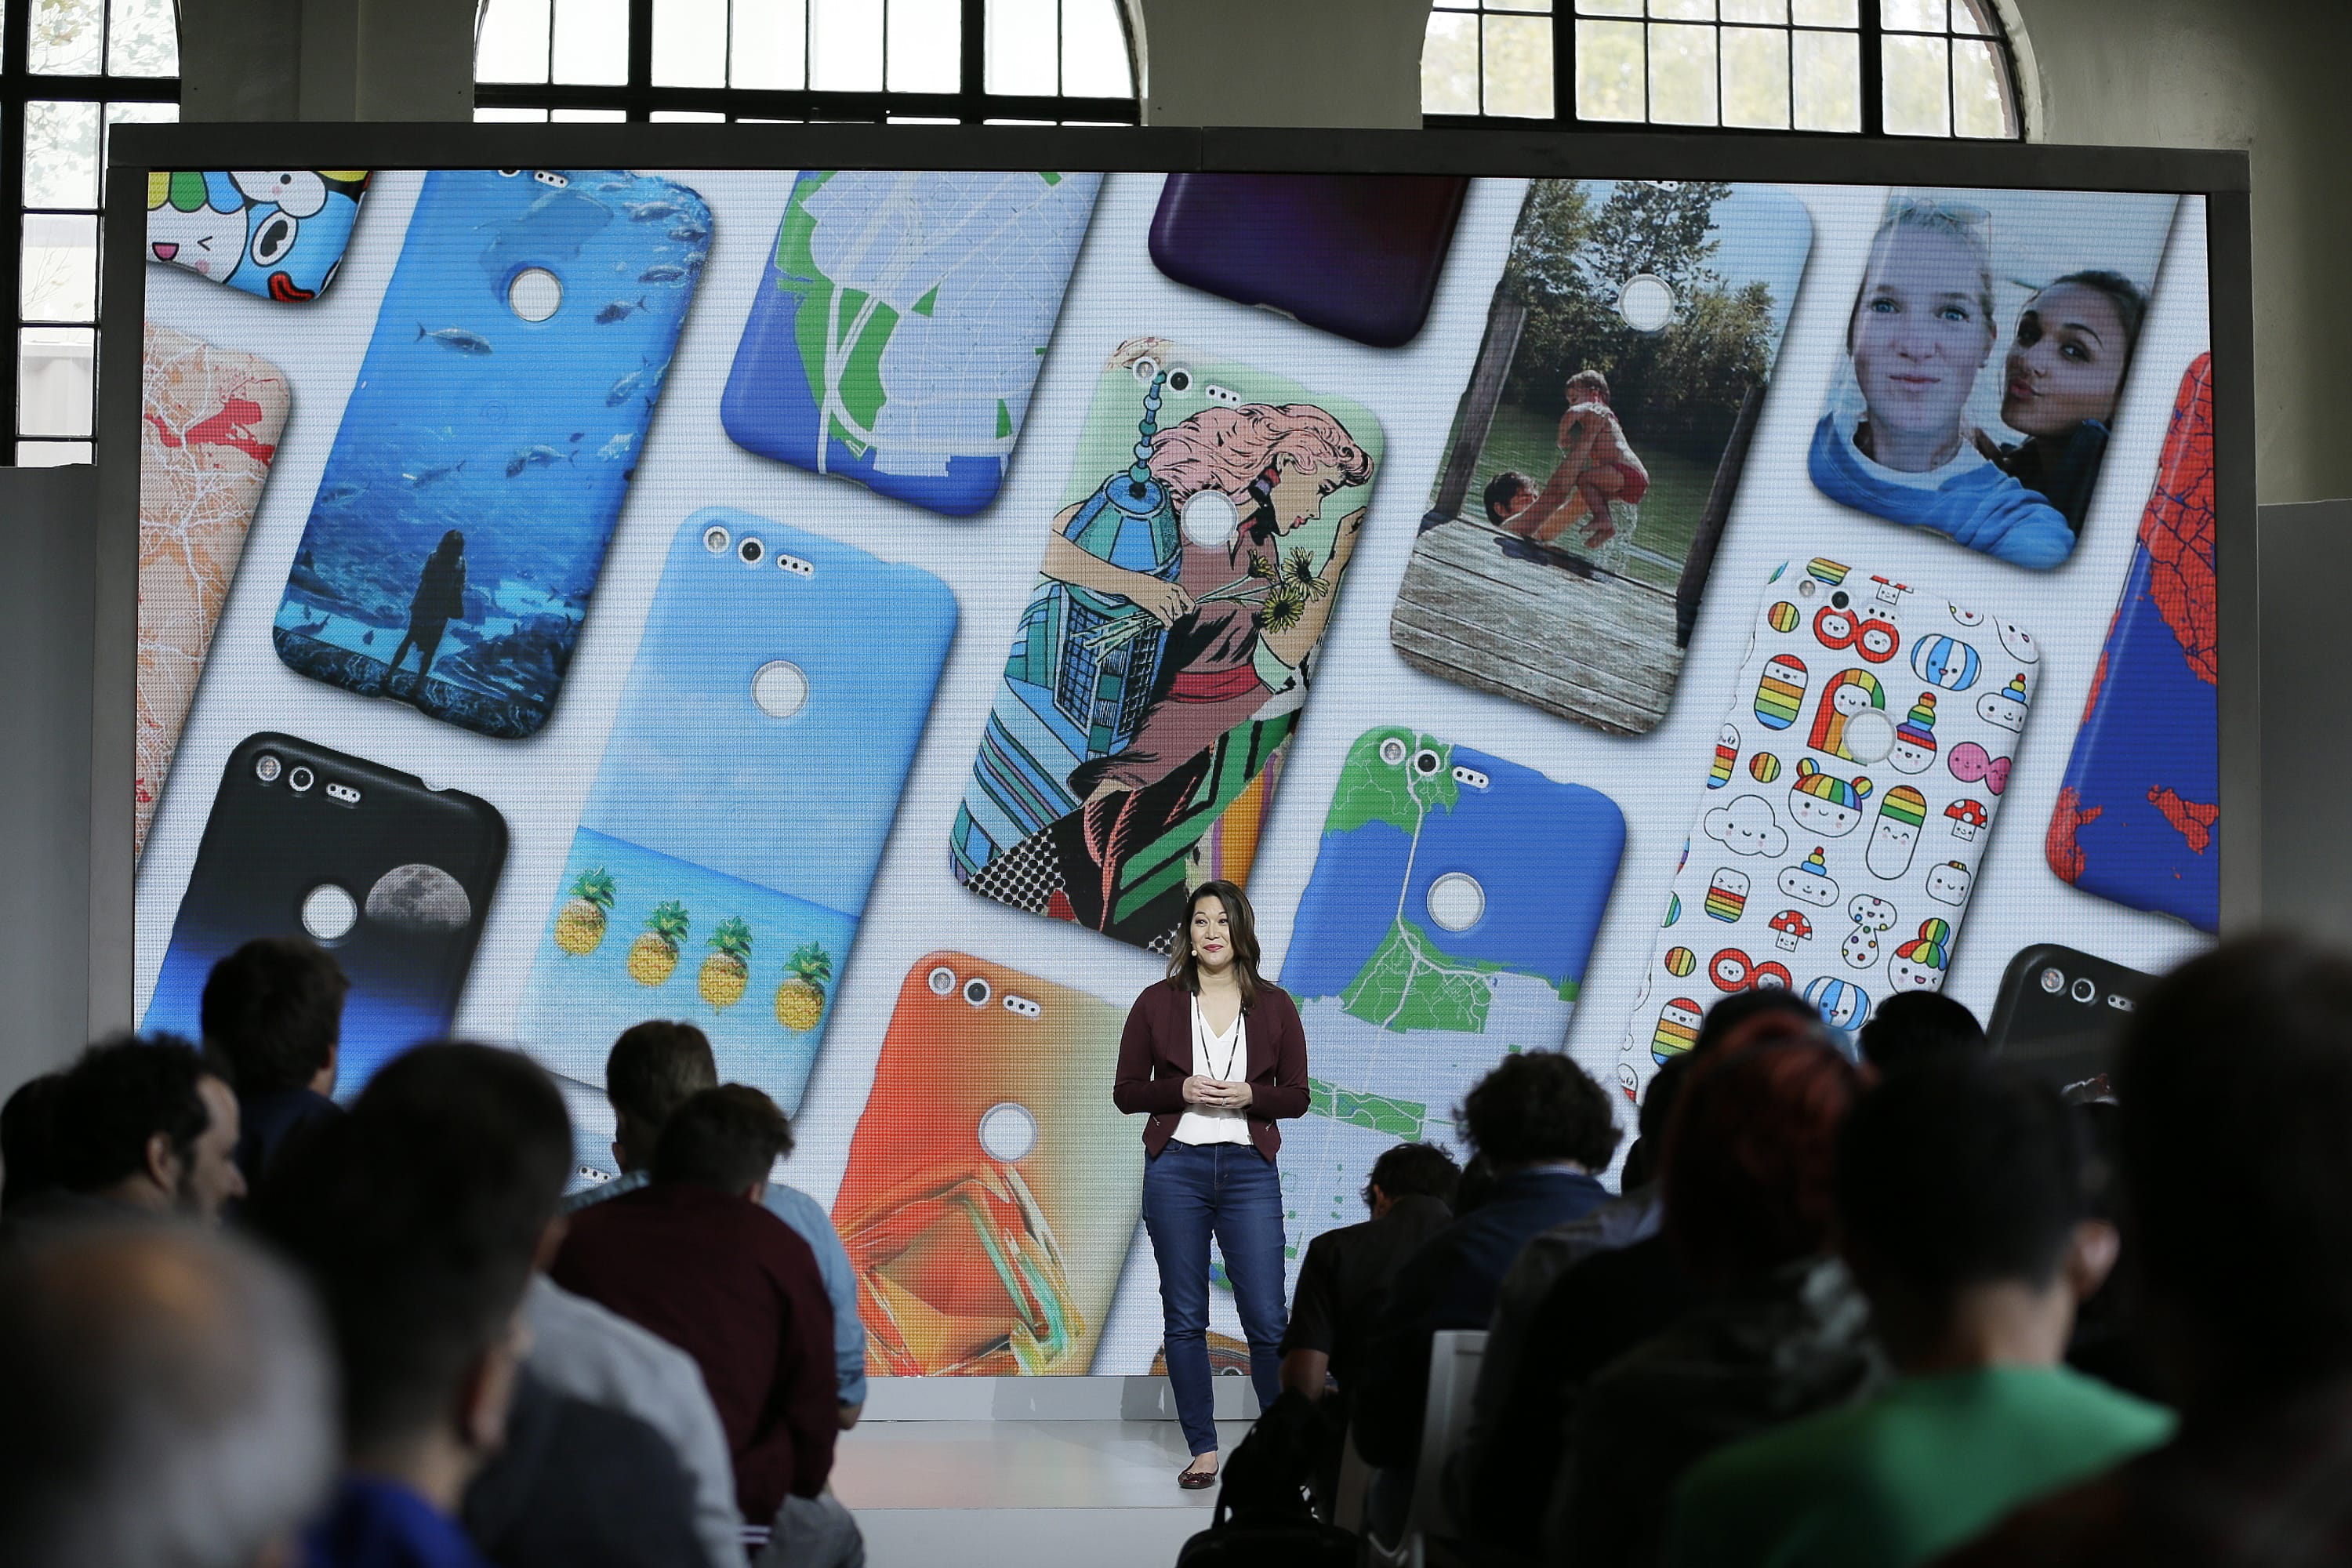 Sabrina Ellis, Google director of product management, talks about the new Google Pixel phone during a product event Tuesday in San Francisco.